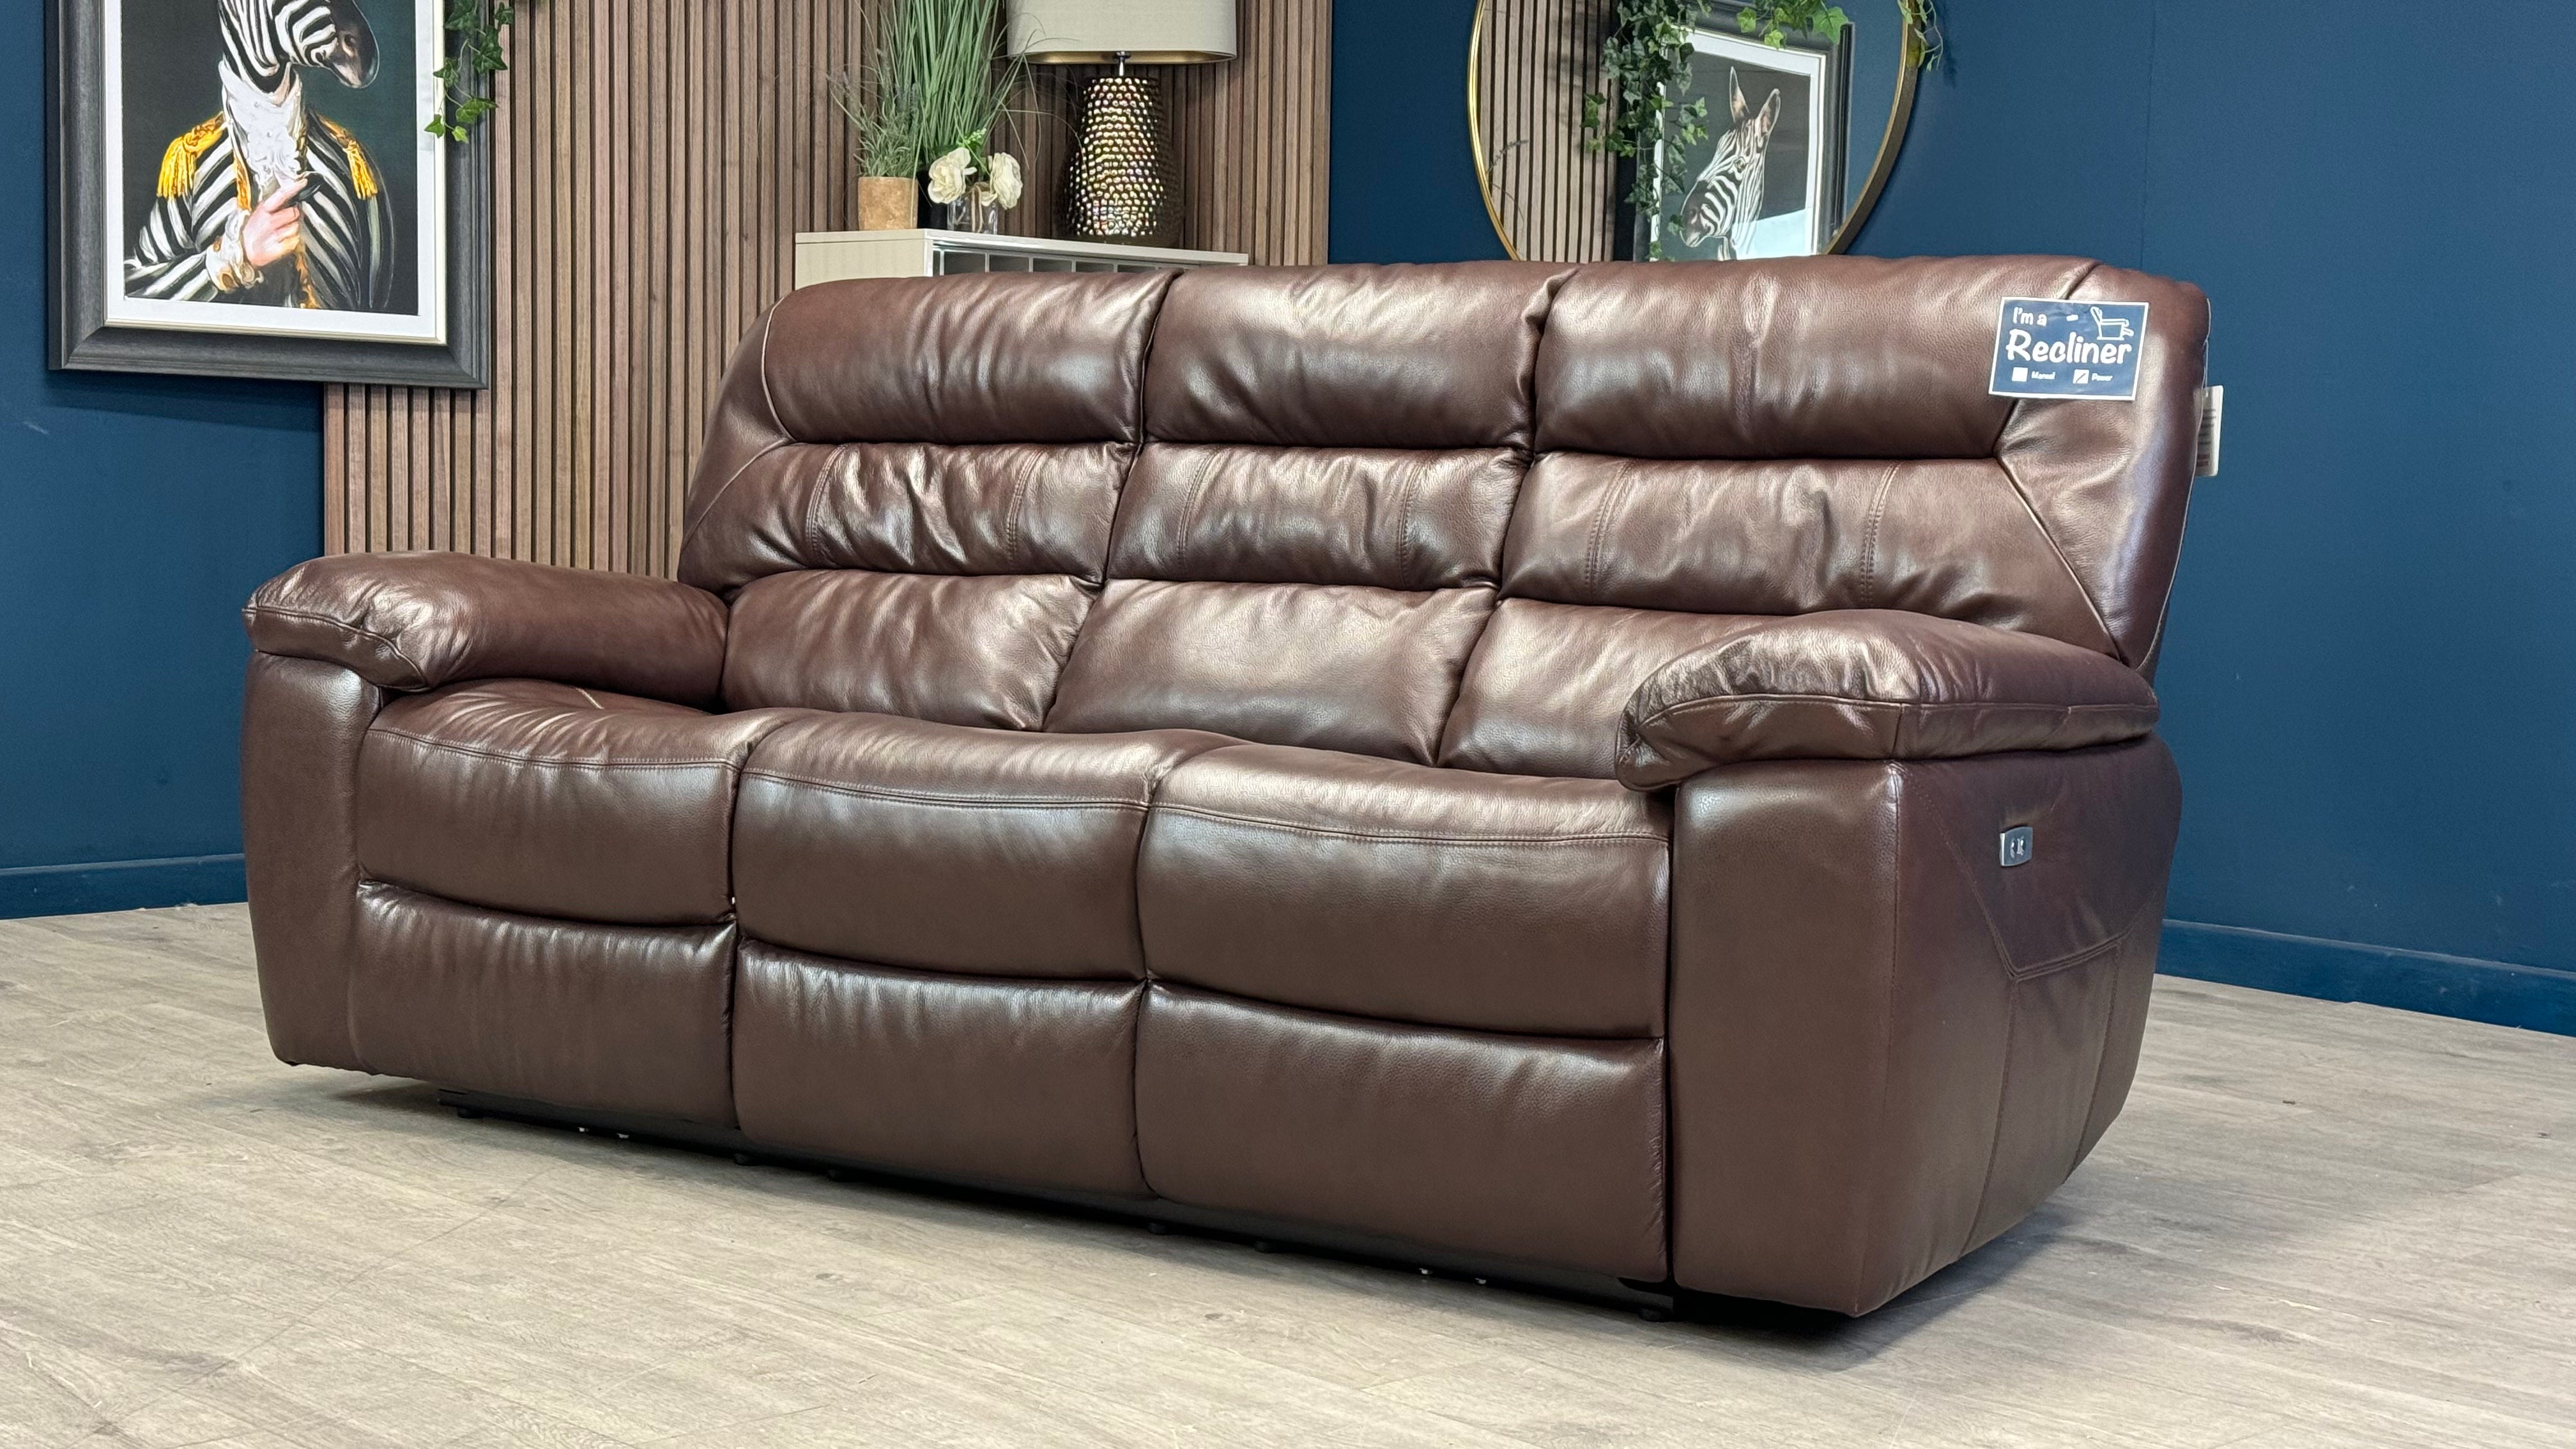 Hastings 3 Seater Brown Leather Power Recliner Sofa